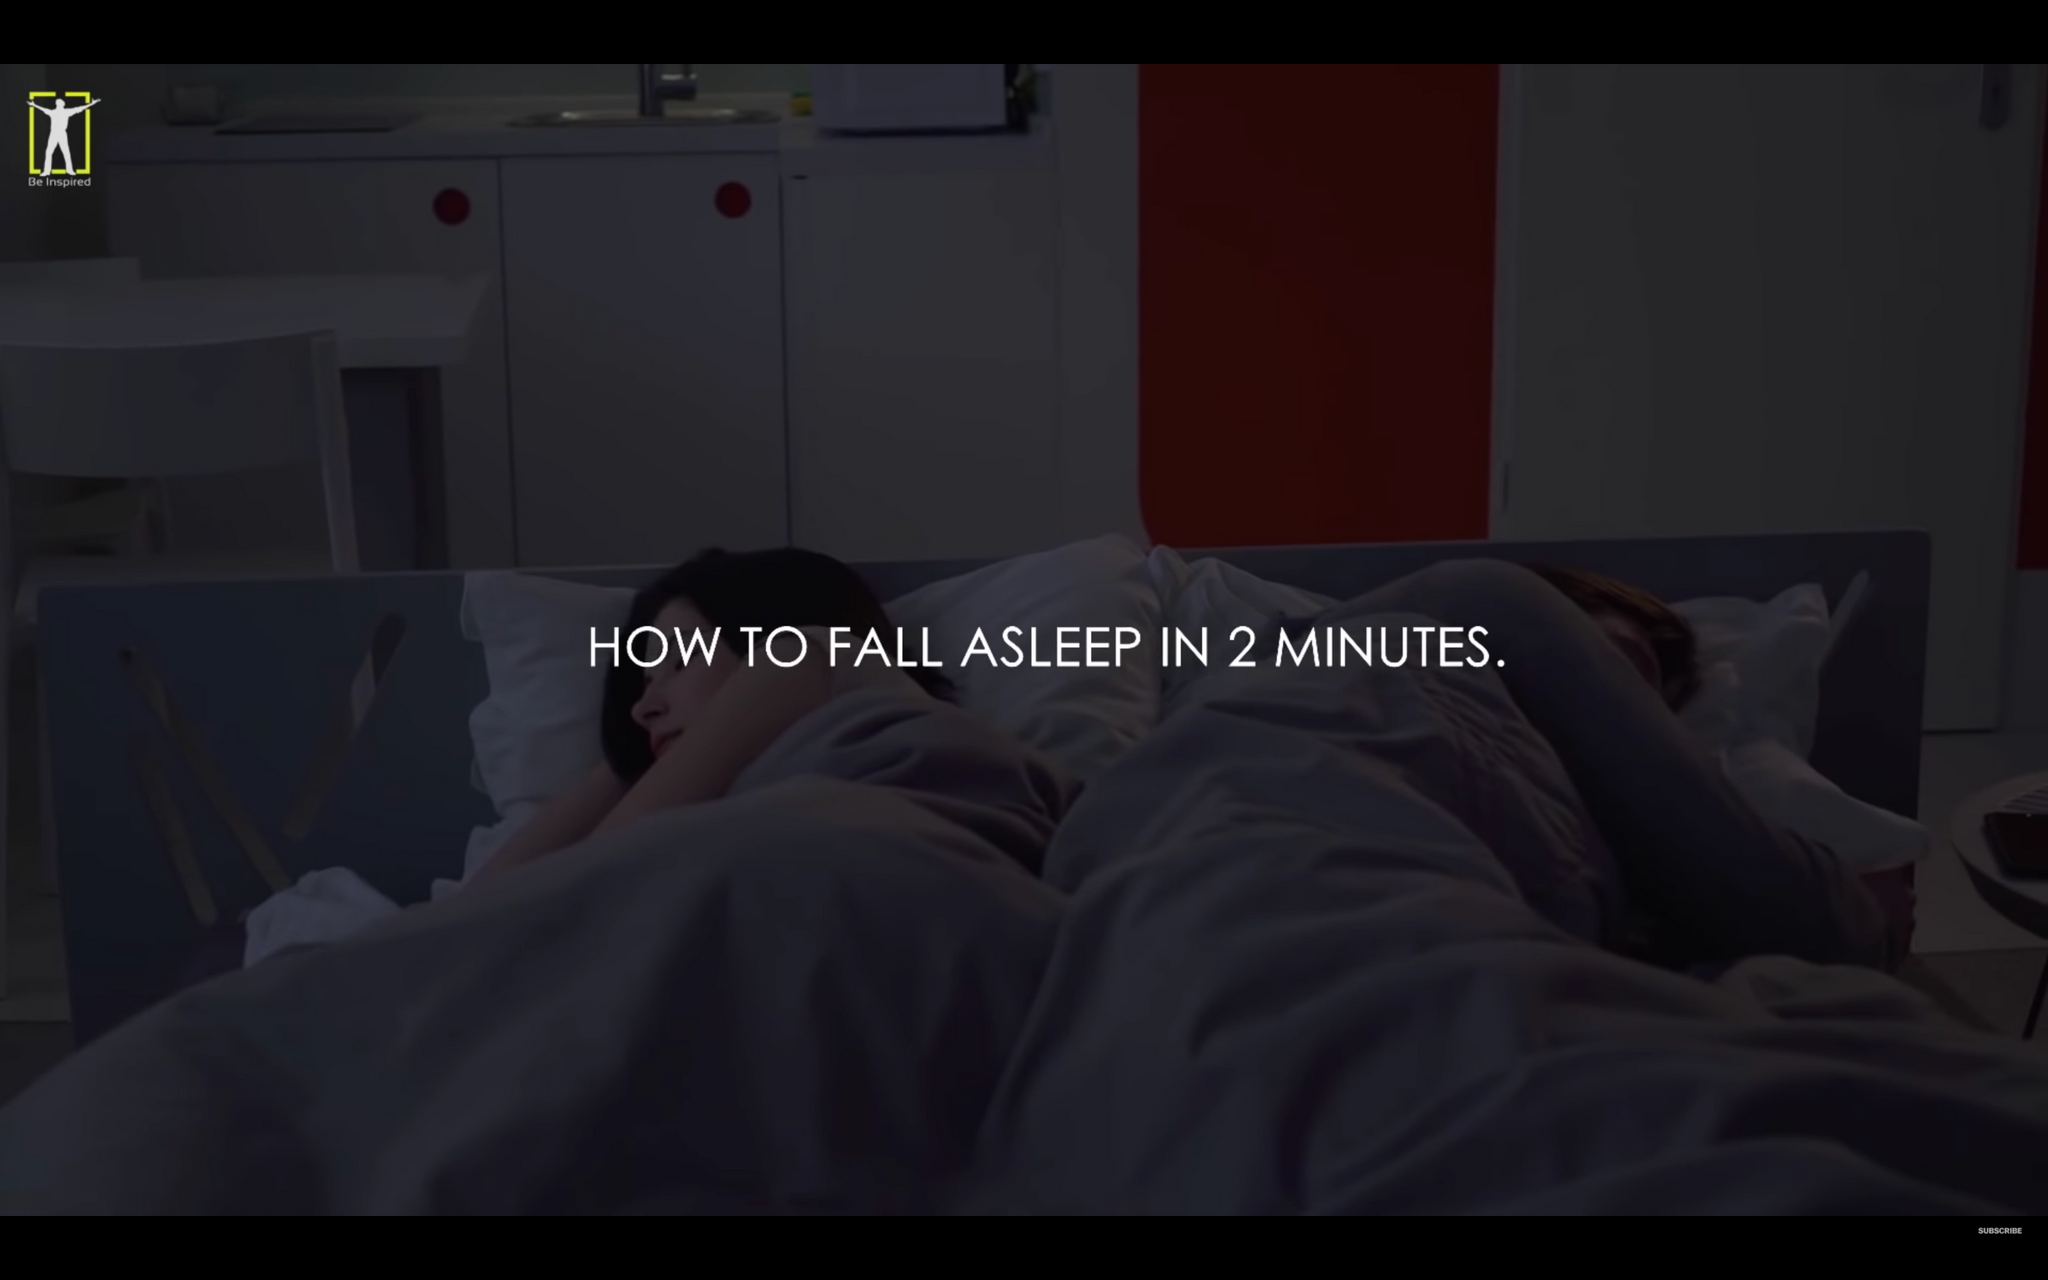 How to fall asleep in 2 minutes